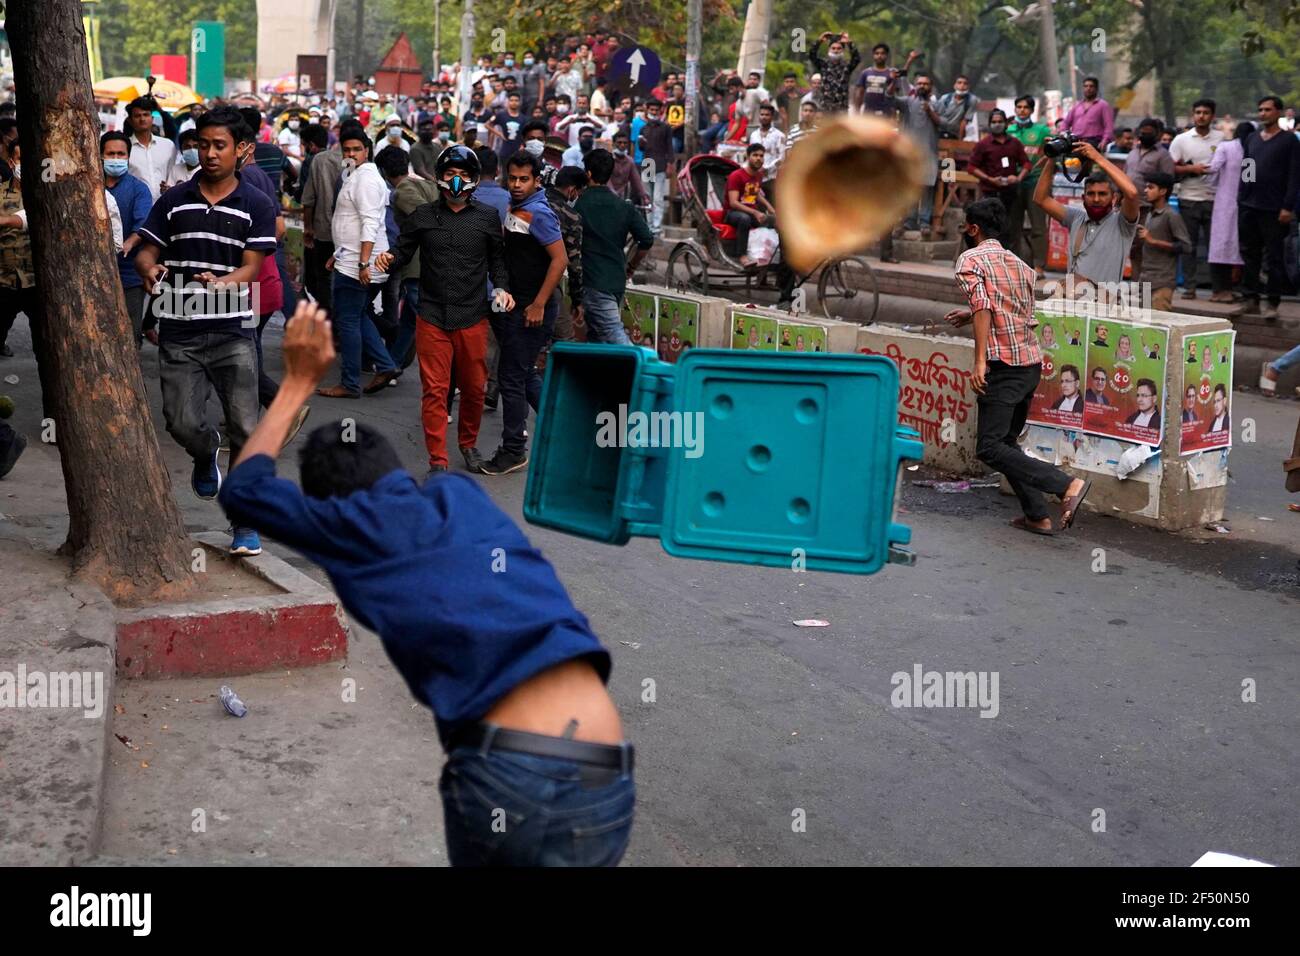 A counter protester throwing a trash can at protesters during a demonstration against the upcoming visit of Indian Prime Minister, Narendra Modi to Bangladesh to attend the golden jubilee celebrations of the country's independence. Stock Photo